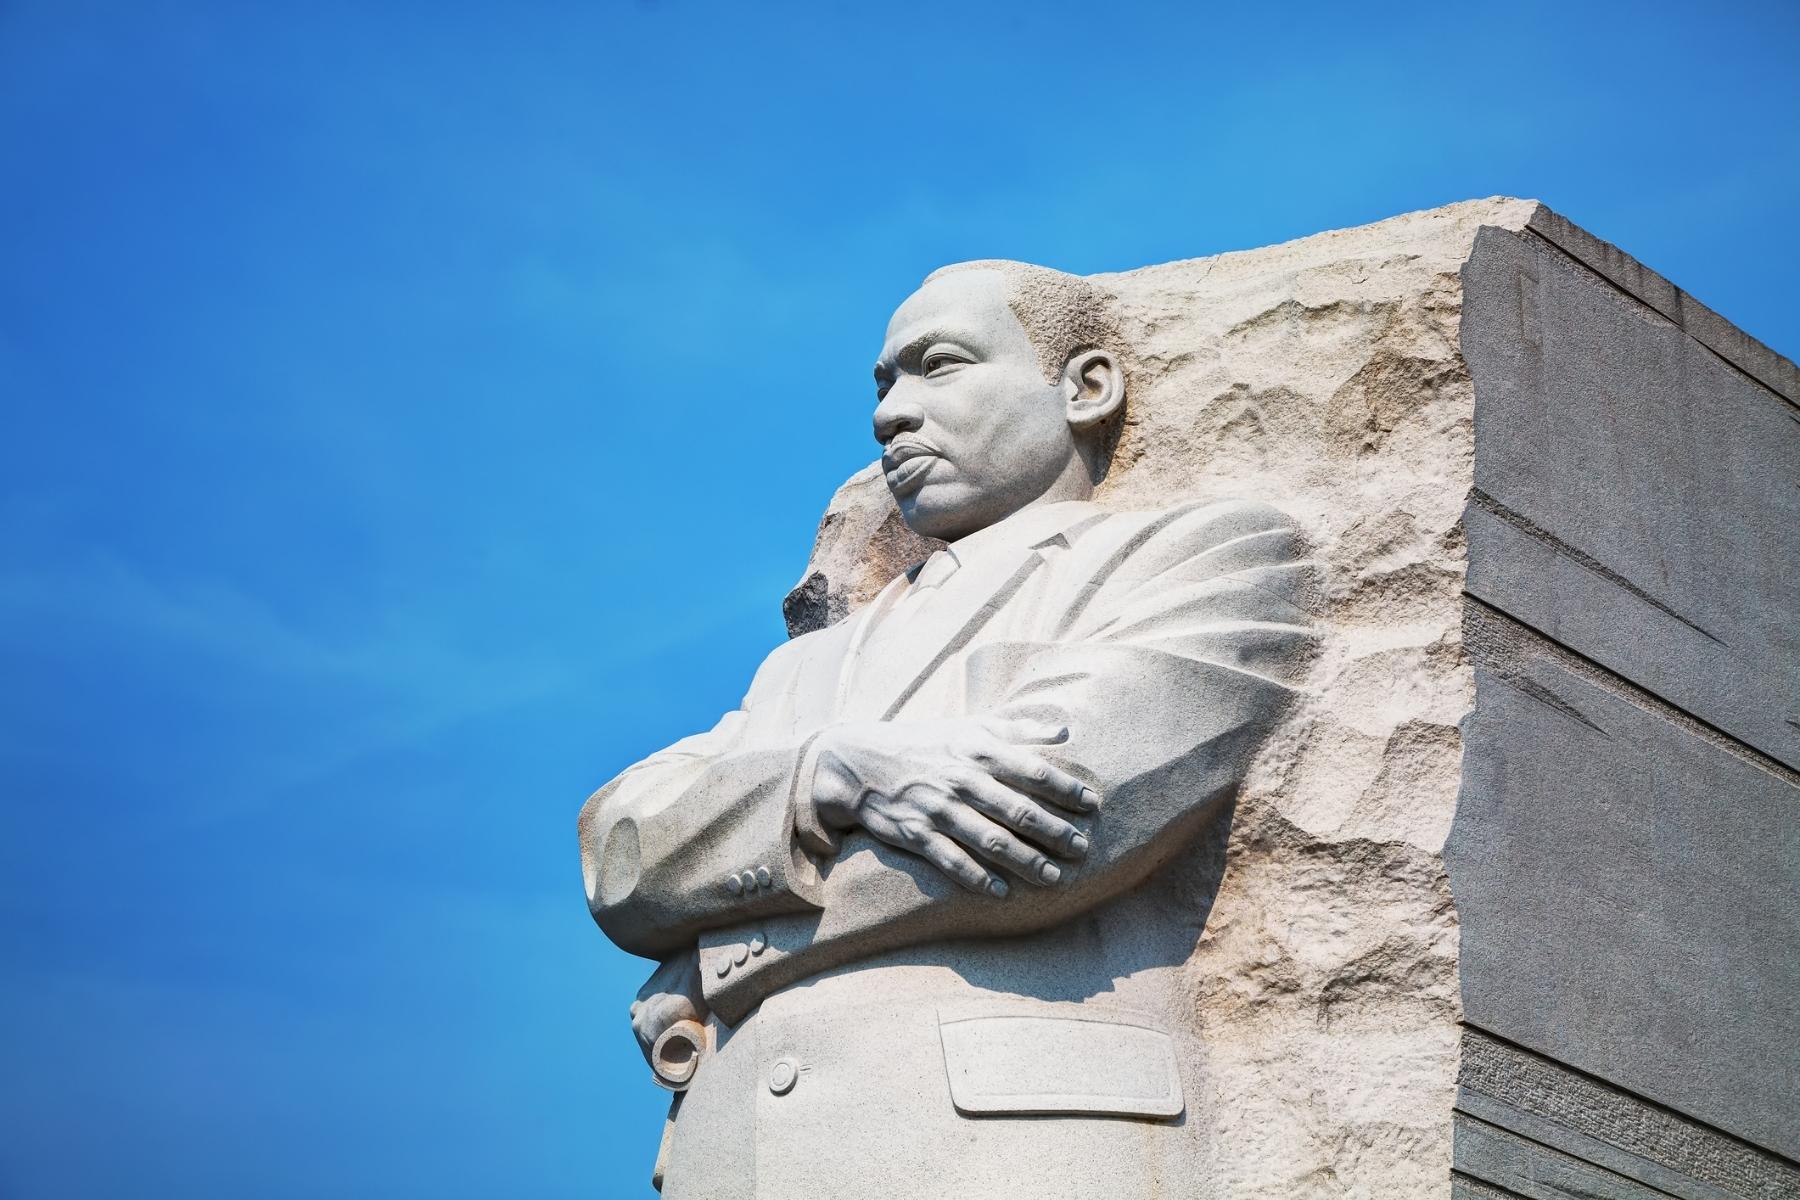 The Martin Luther King Jr. Memorial in Washington, DC.